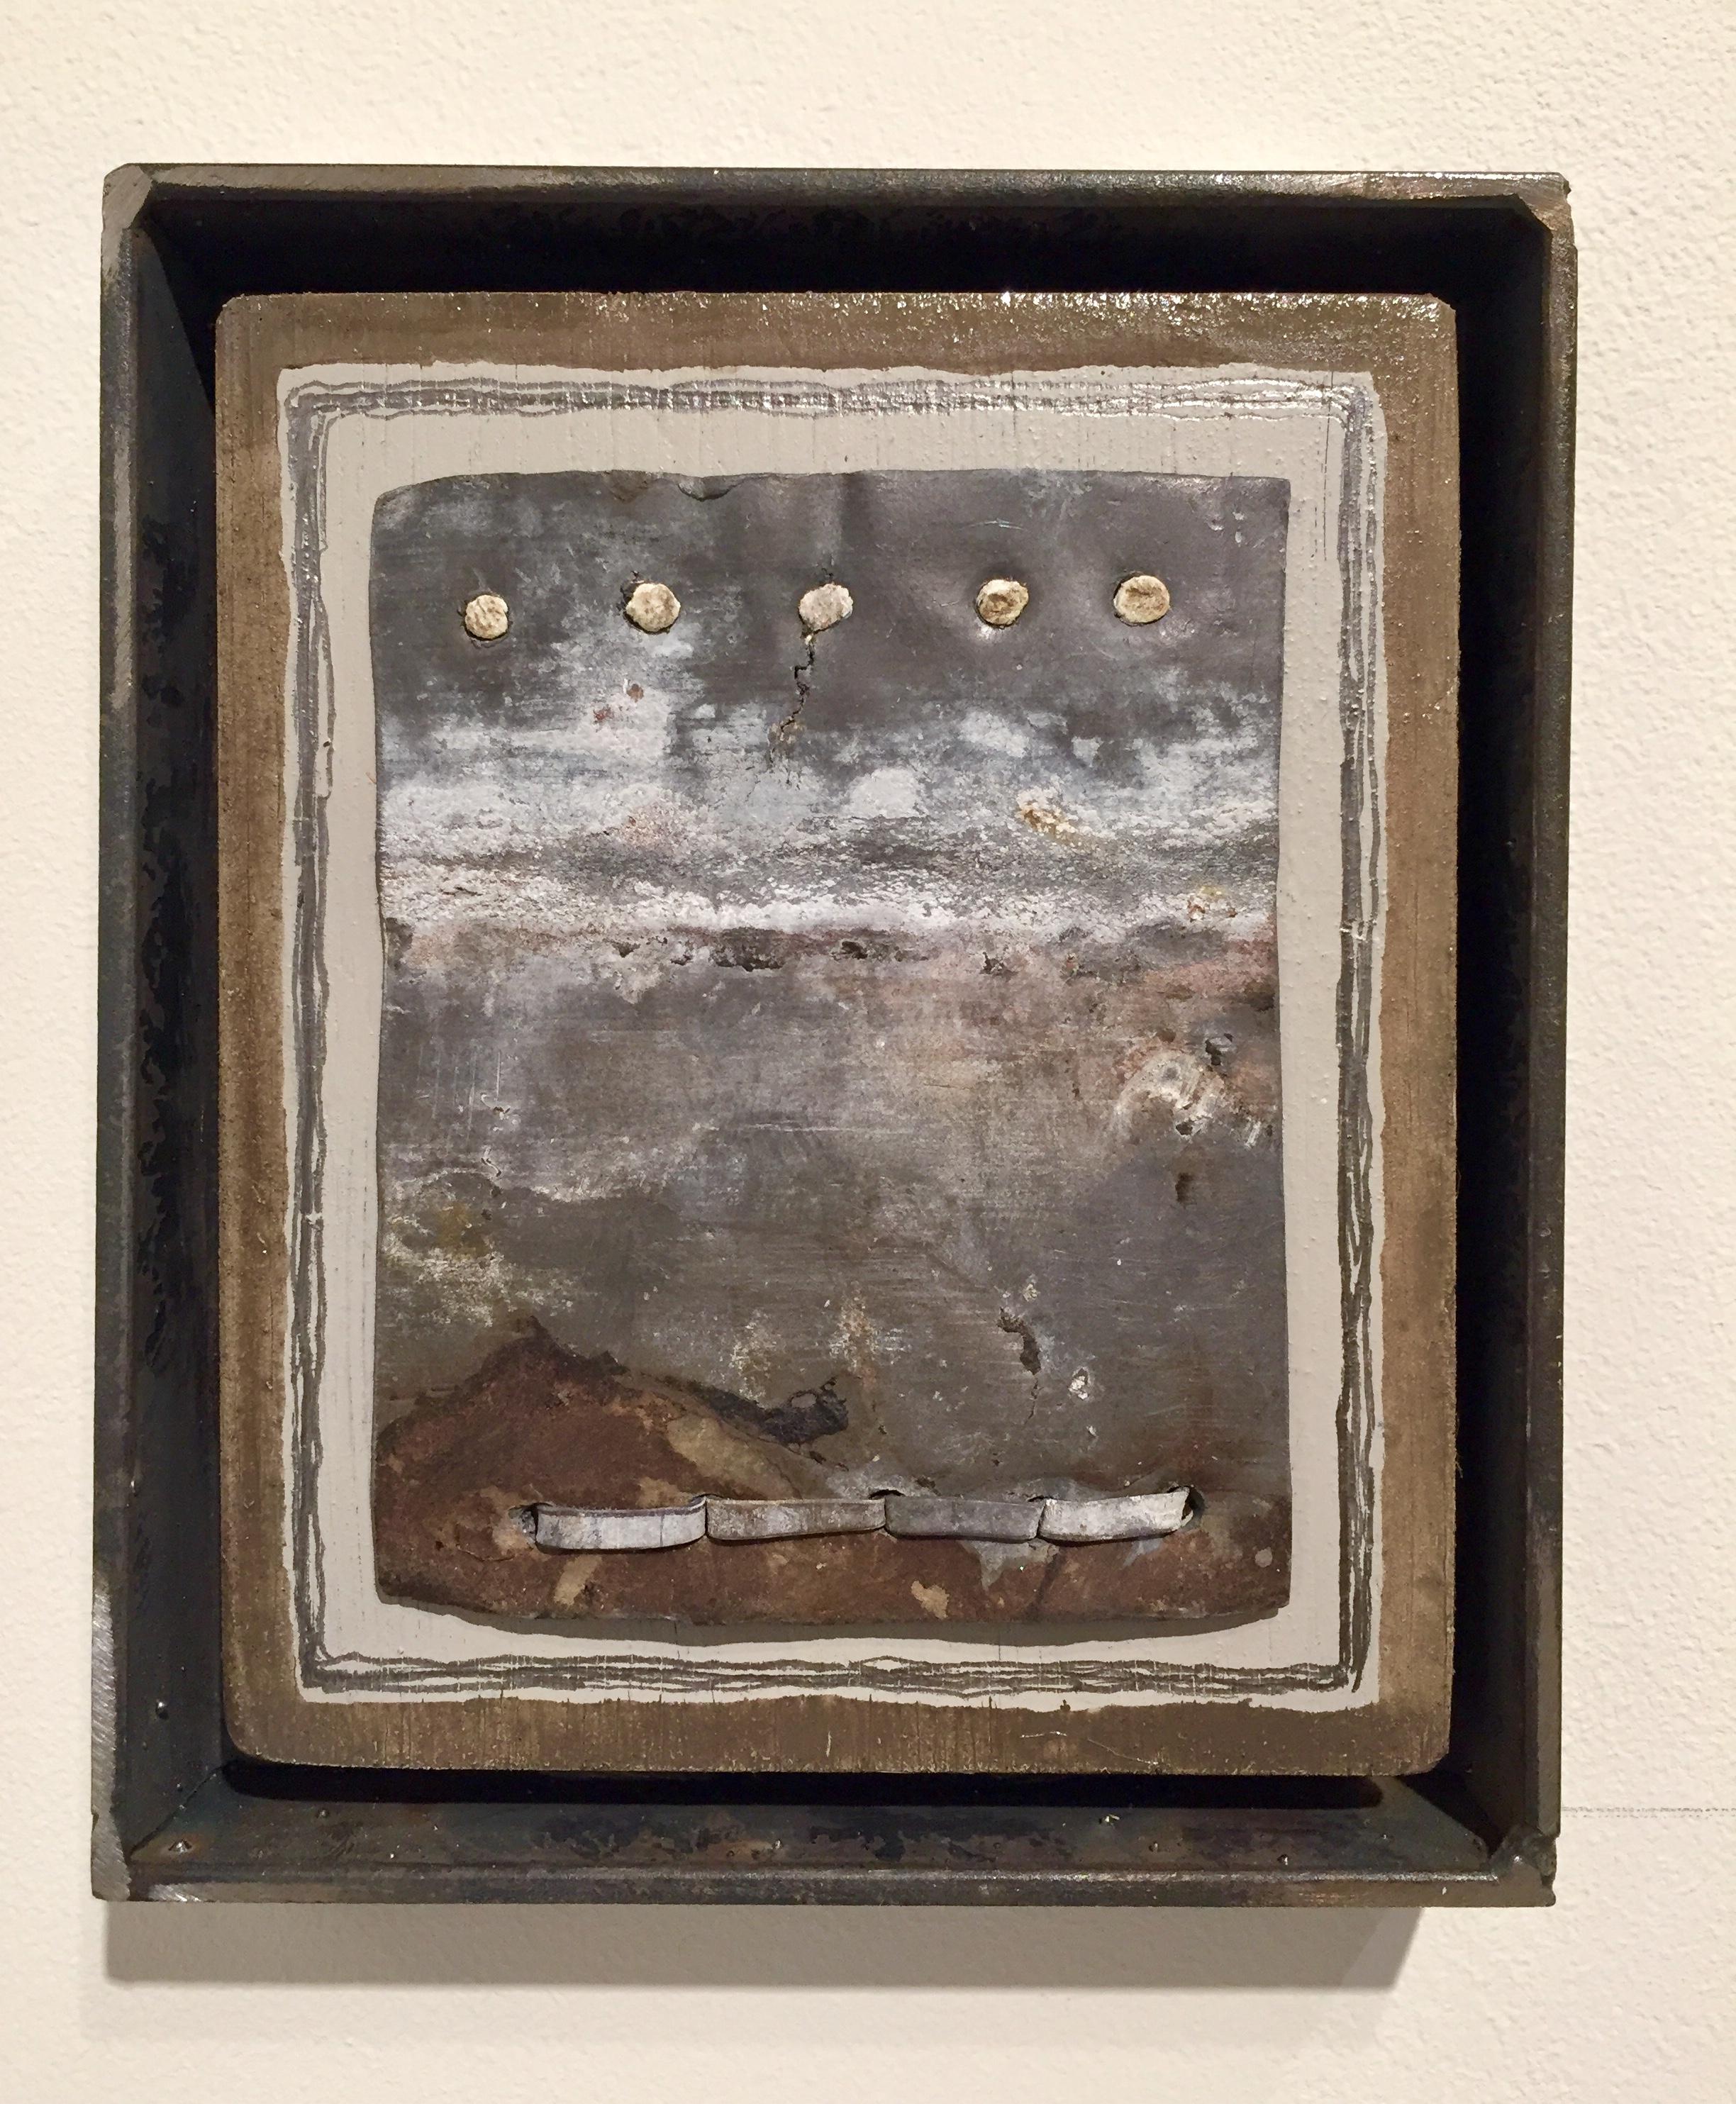 A small wall sculpture representing a panoramic landscape were the earth's surface and thy sky appear to meet, it is not a replication of a particular observation but simple in form, tactile in material and compact in scale, it's the artist's intent